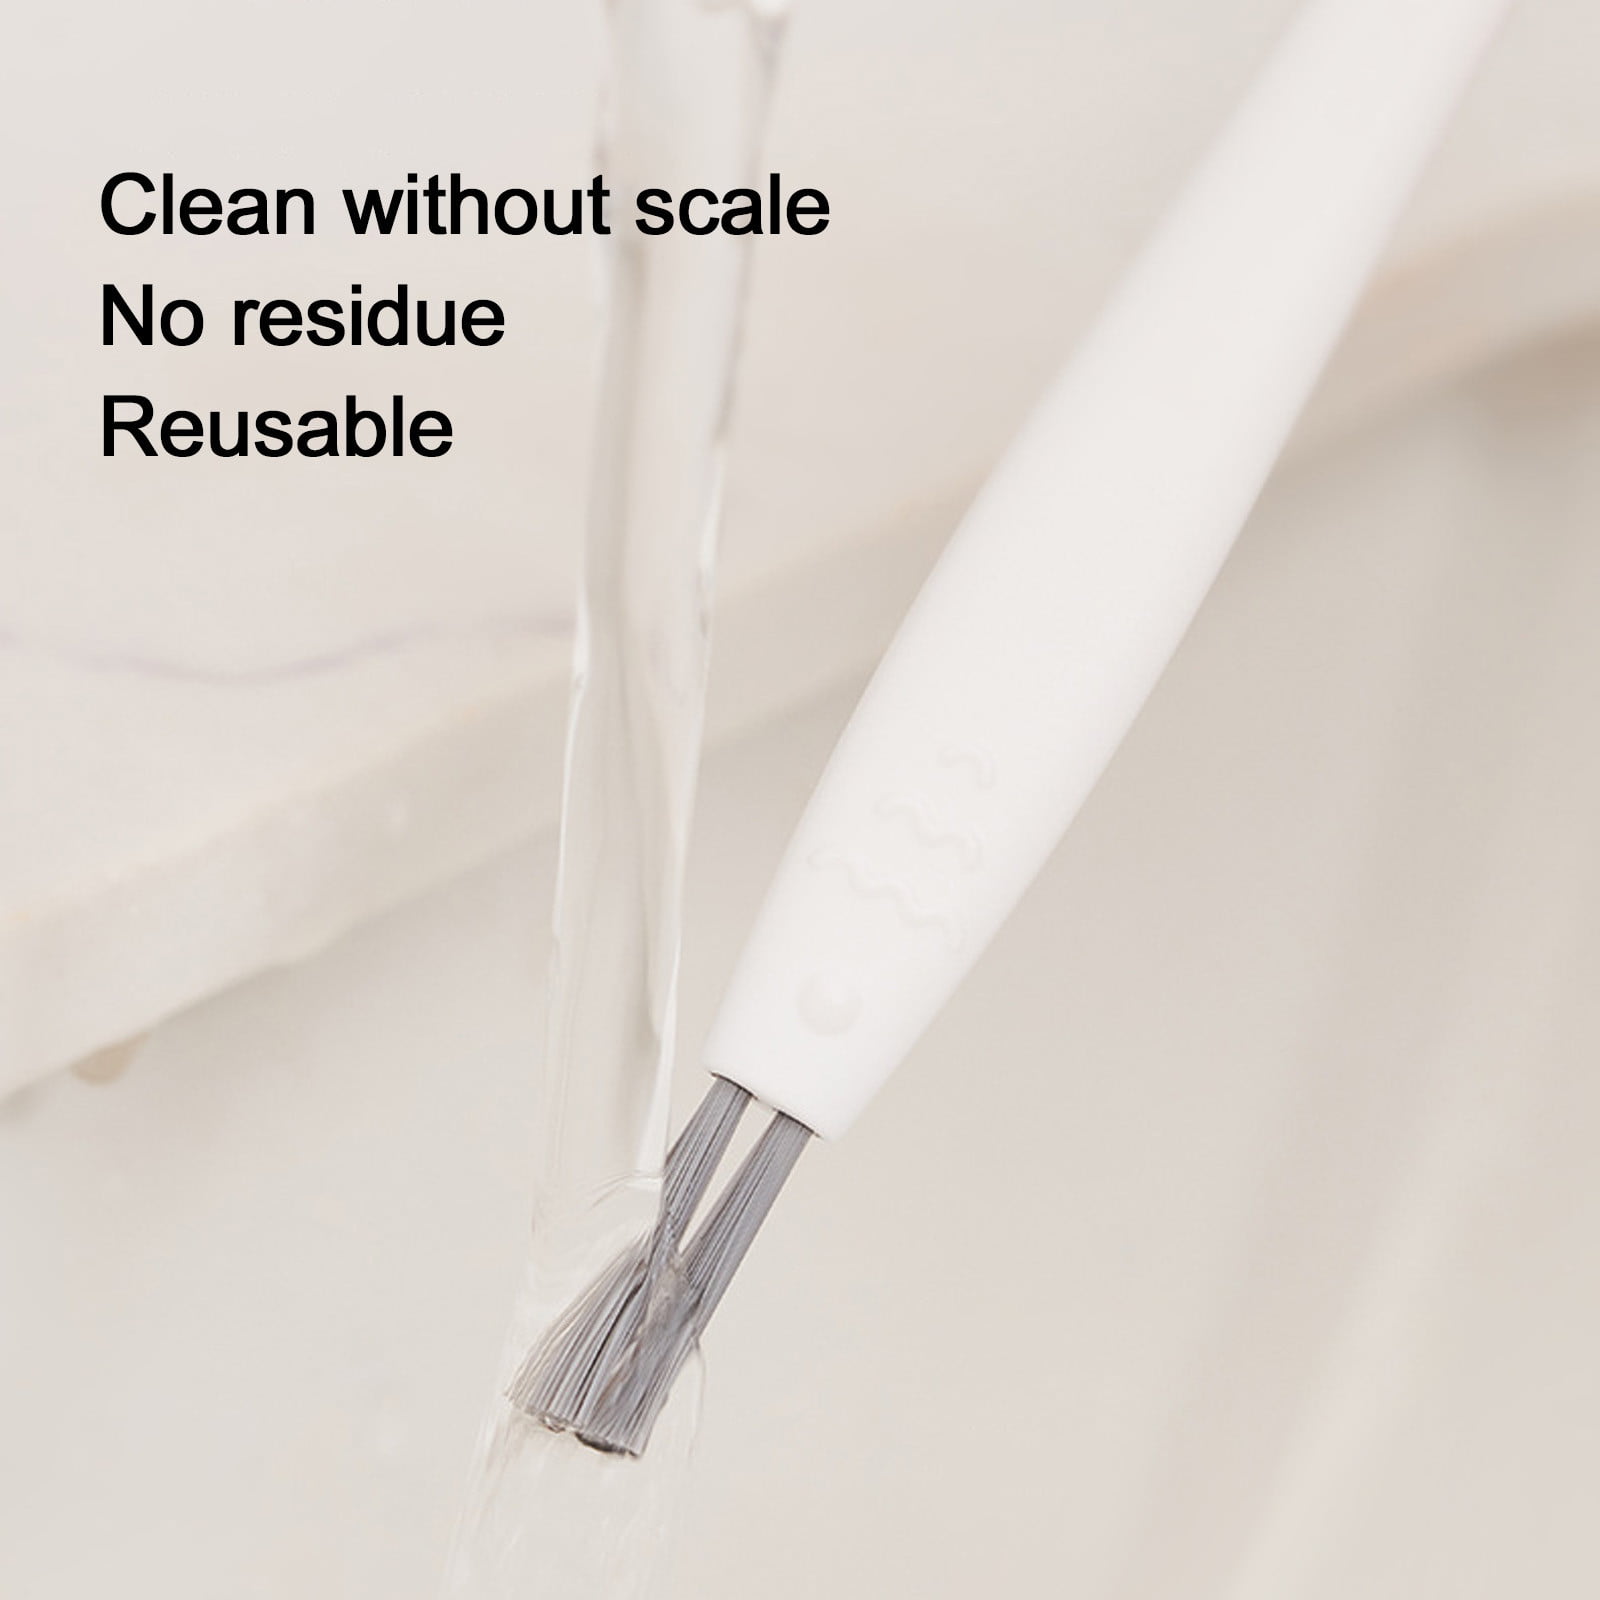  Small Crevice Cleaning Tool for Small Space,3-in-1 Small Cleaning  Brushes for Household Use,Tiny Soft Scrub Cleaning Brush Gadget for Groove  Window Door Track Corner Gap Humidifier Bottle : Home & Kitchen